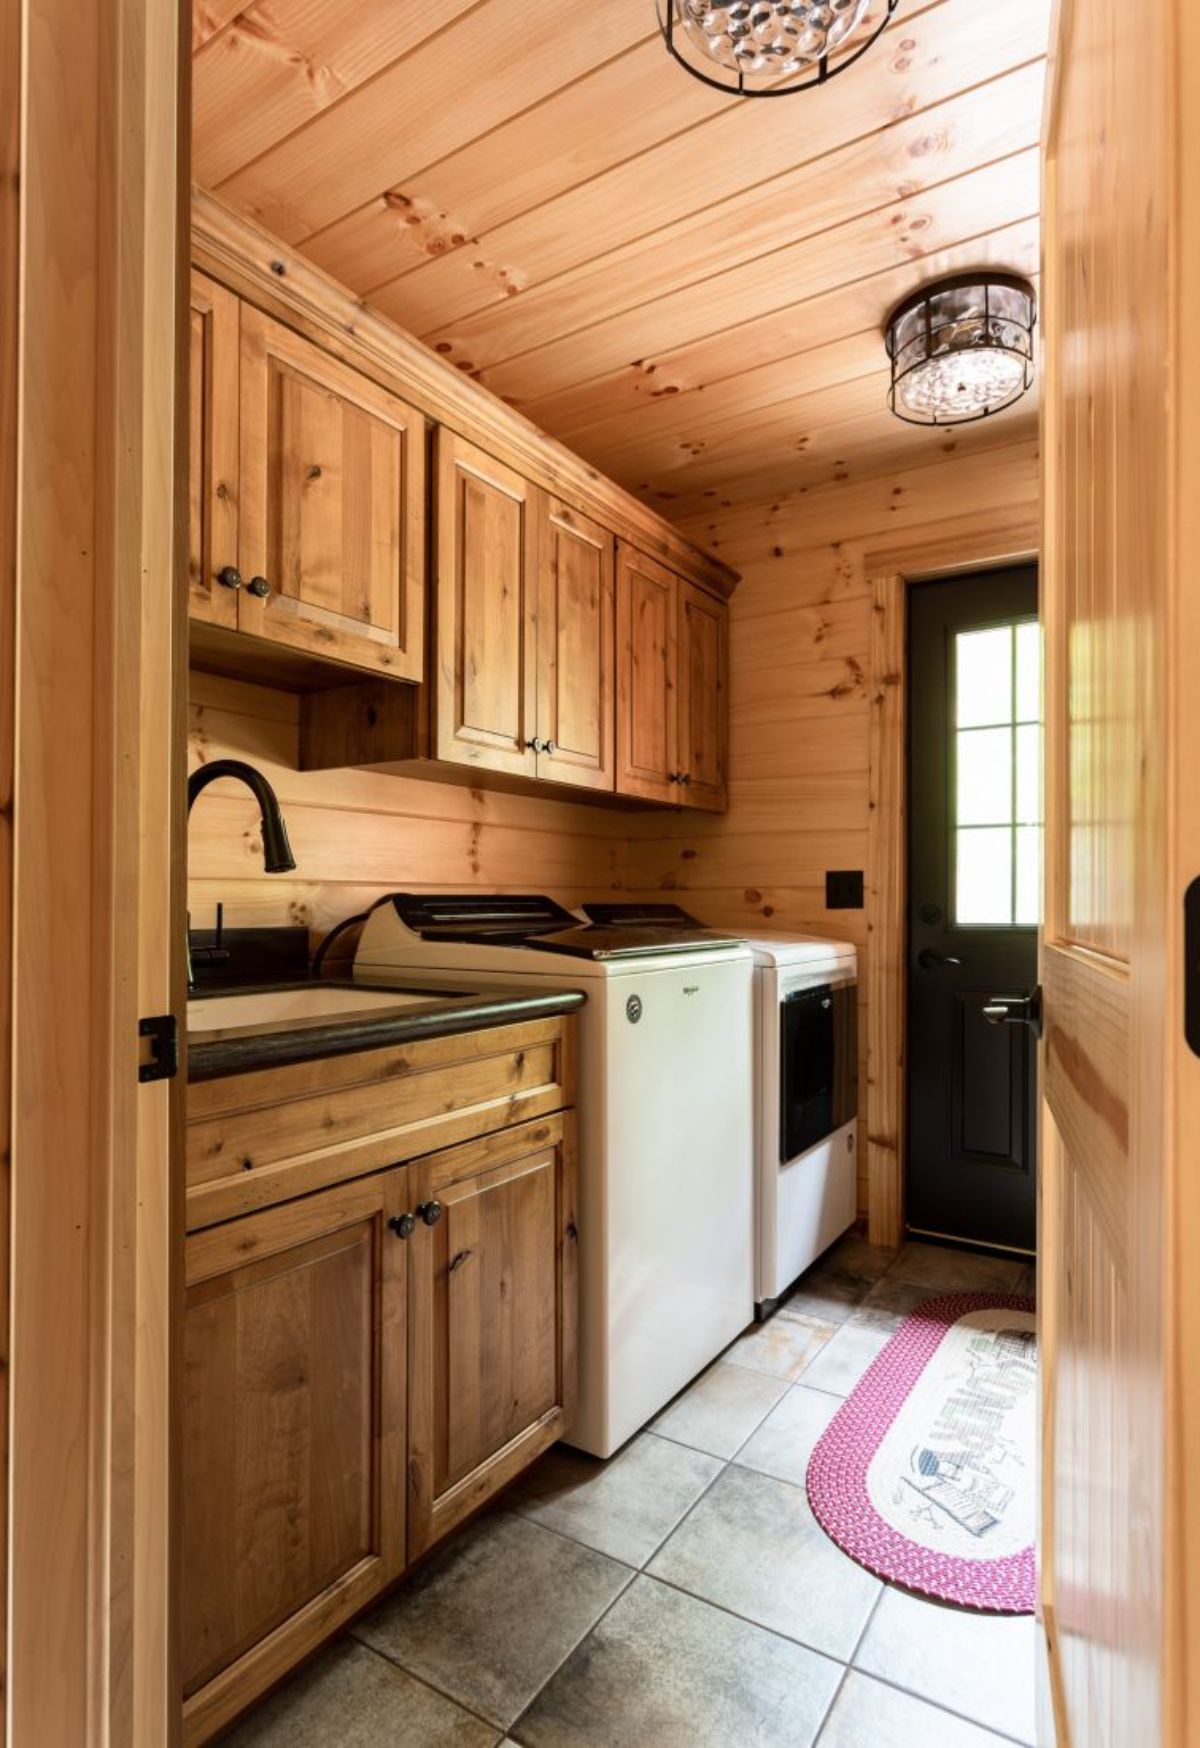 white washer and dryer against wall by dark door with light wood cabinets all around in cabin